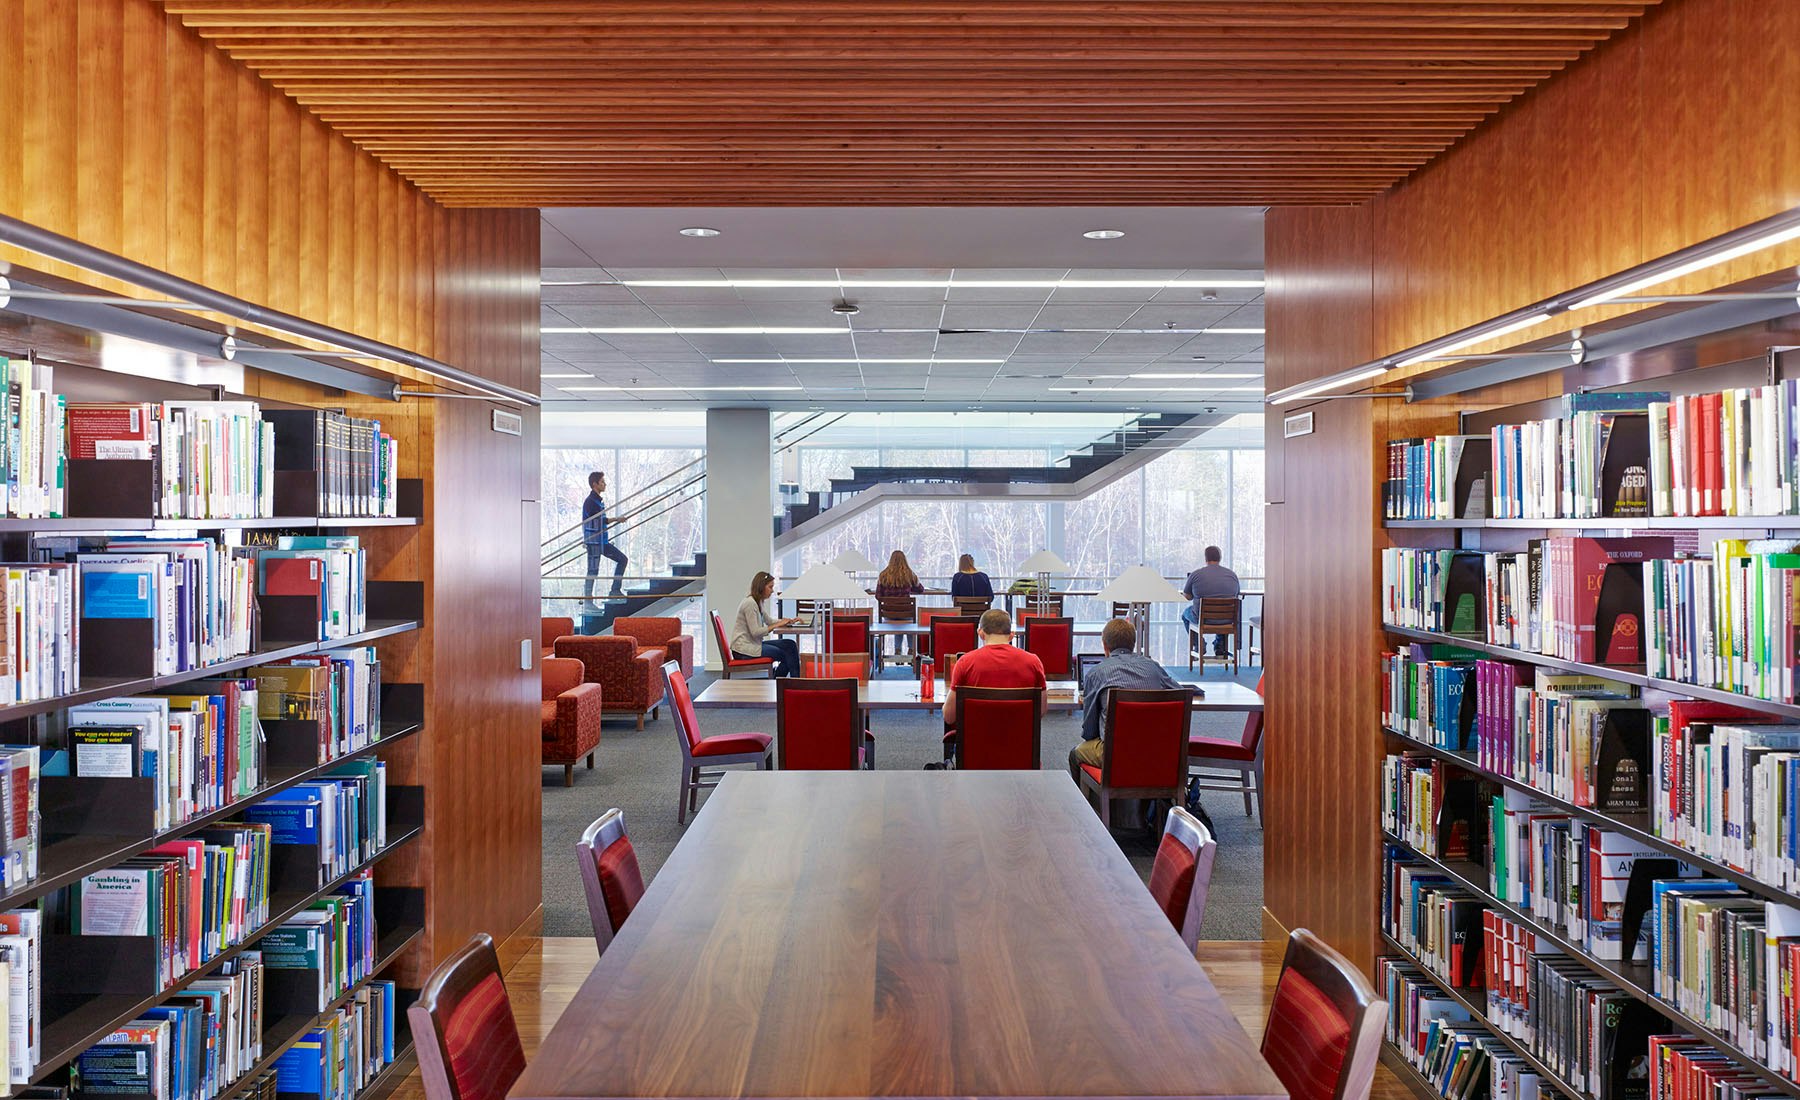 Compared to prototypical libraries of the past, Liberty’s new flagship library reverses the notion of book storage as the central motive of a library’s design in favor of a user-centric layout that places student activity in the foreground.